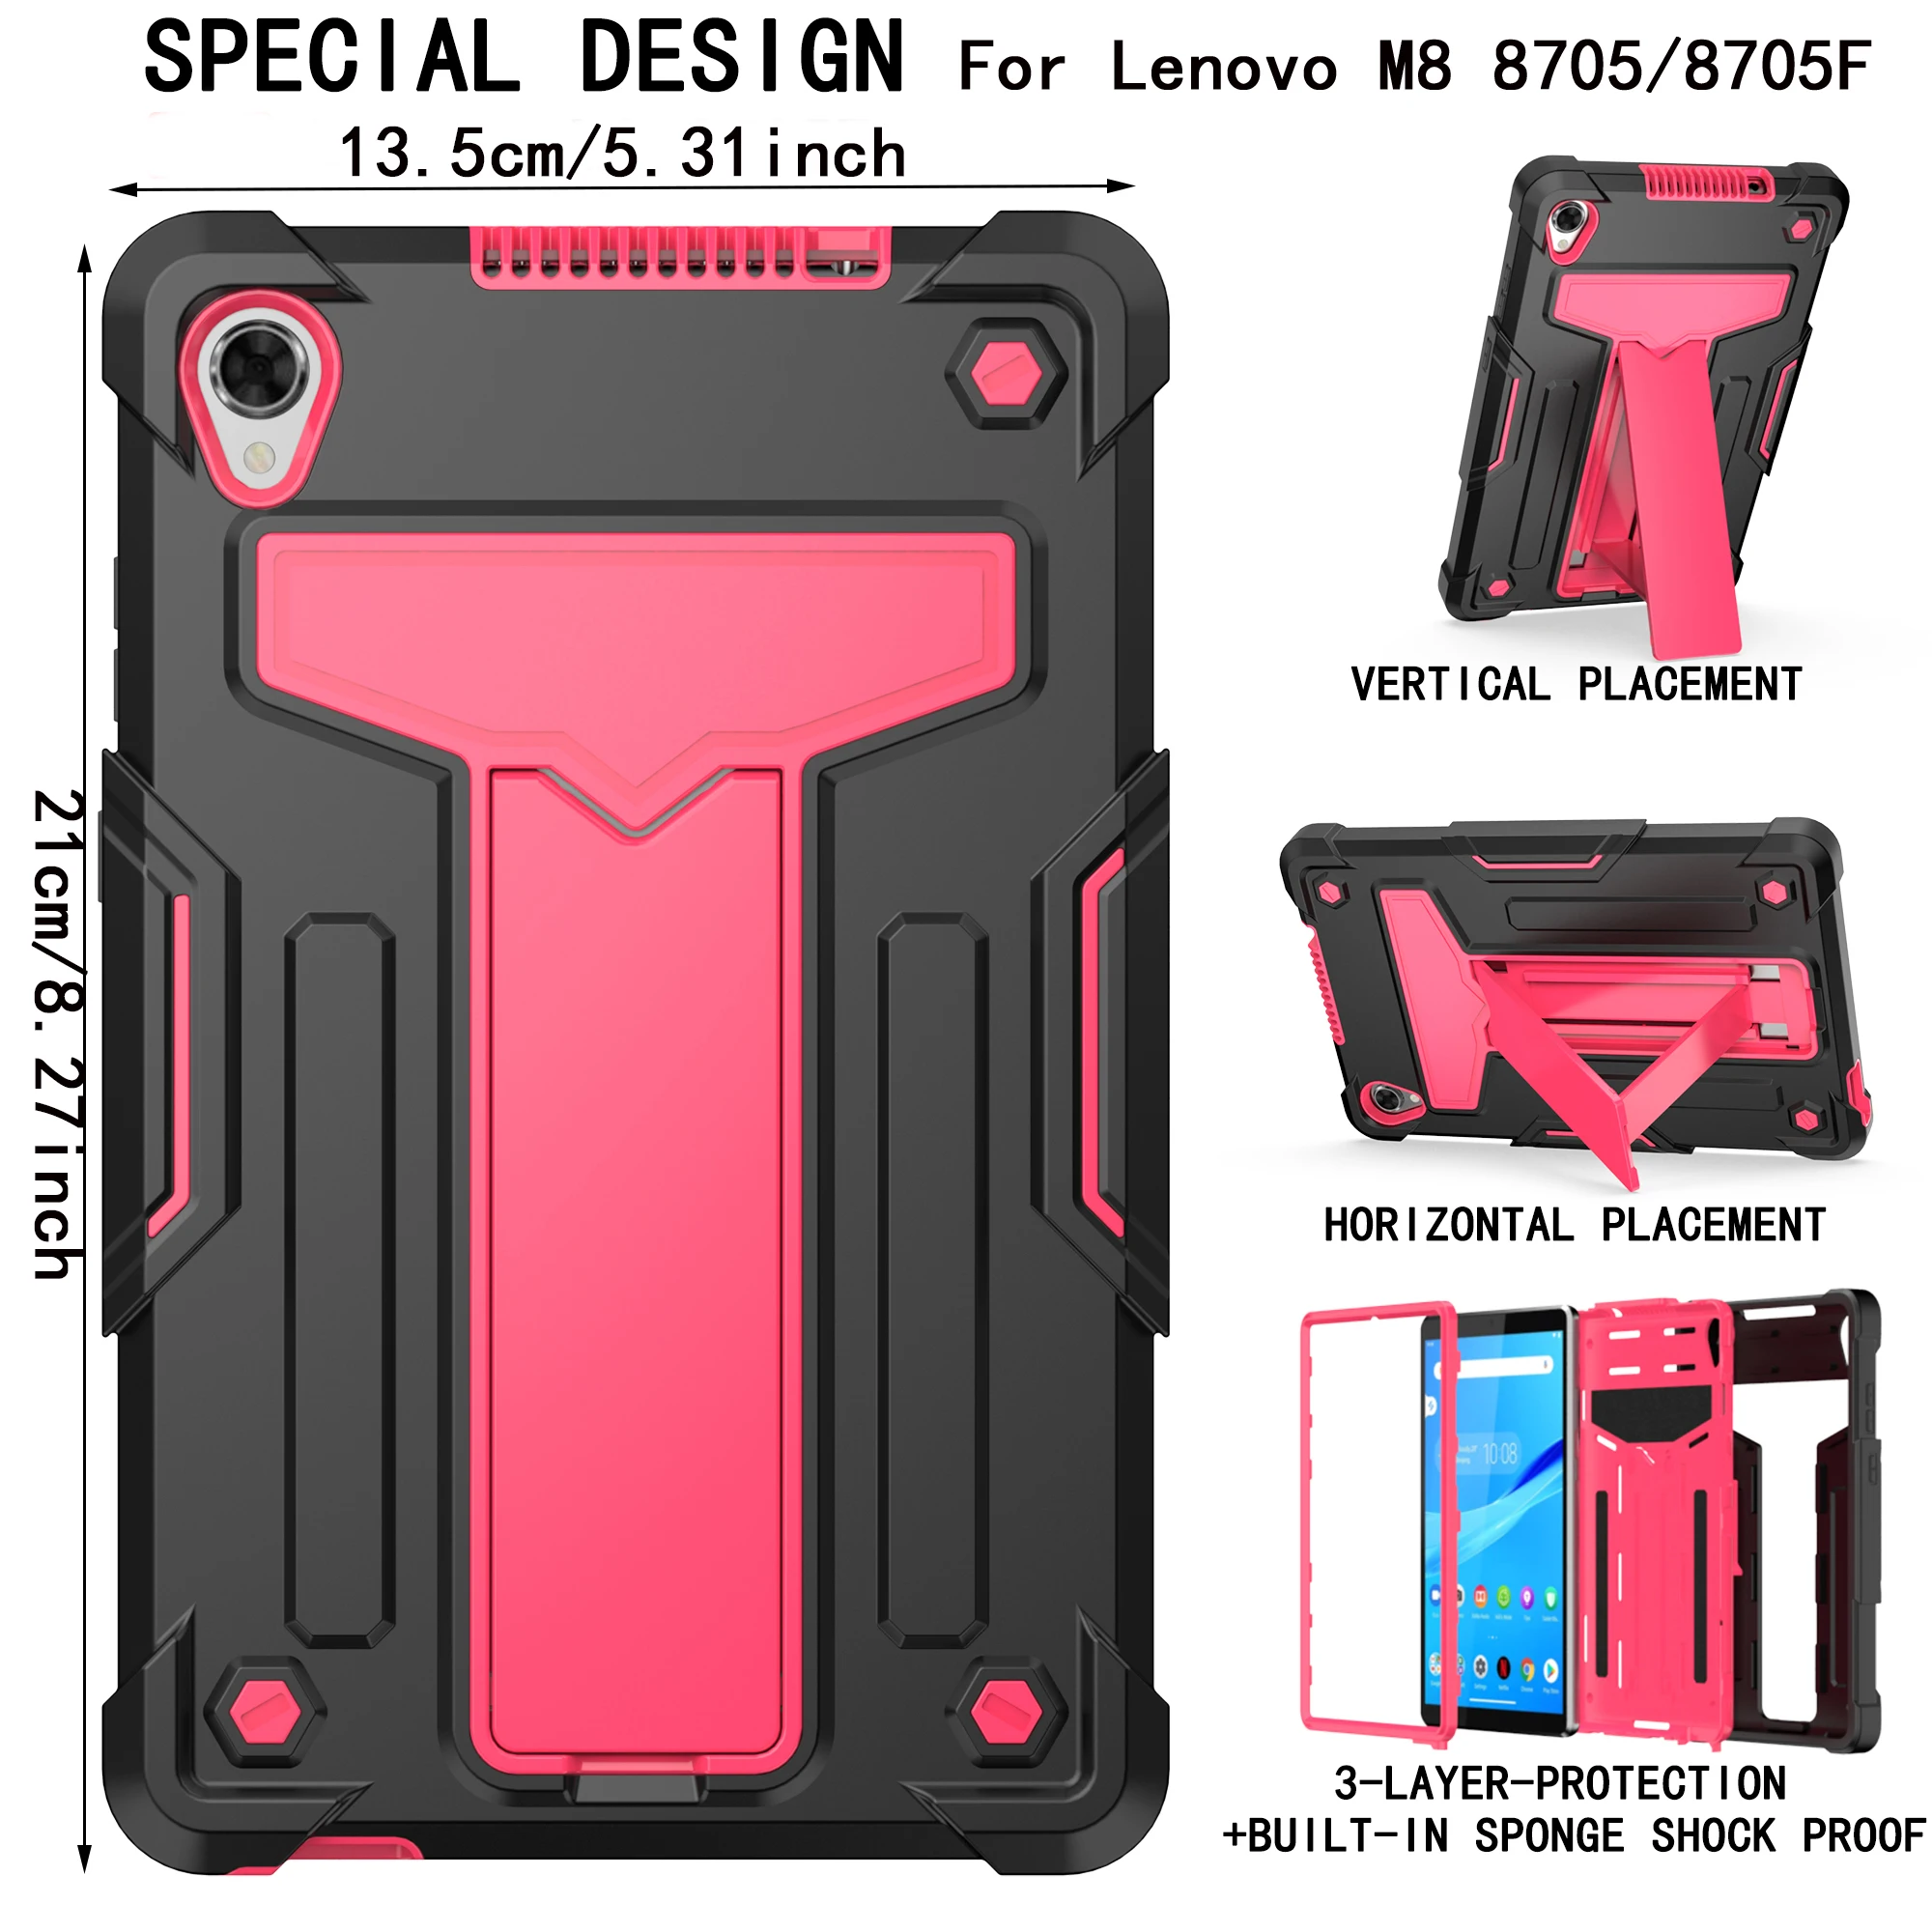 

Tablet Cover For Lenovo M8 8705/8705F silicone horizontal/vertical 3-layer-protection shatter-resistant Shockproof tablet case.